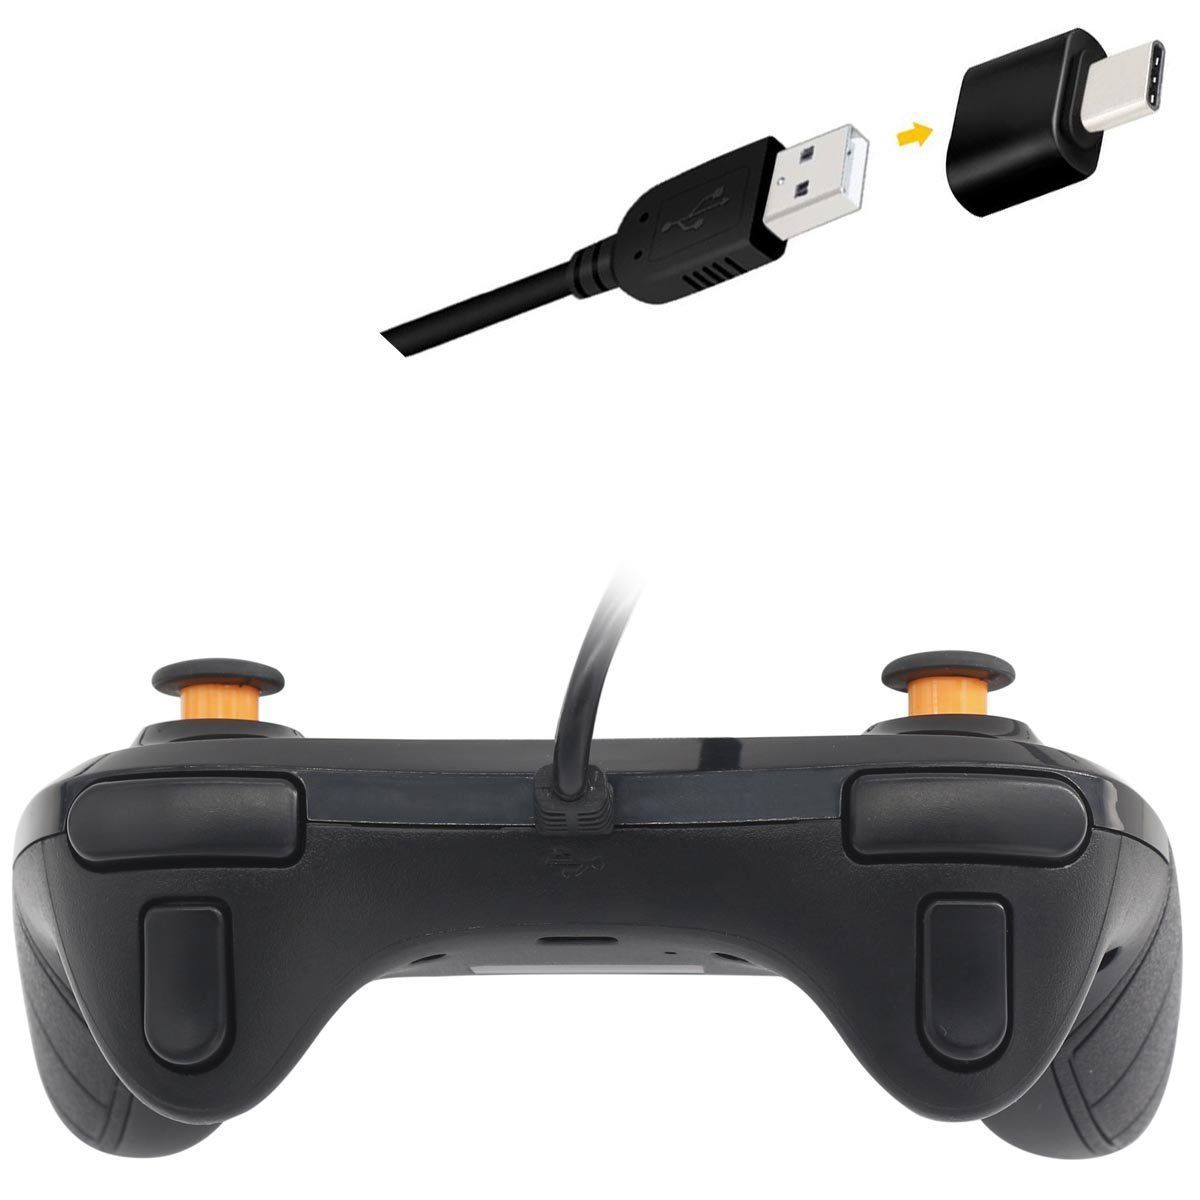 DOBE-TNS-901-For-Nintendo-Switch-Pro-USB-Cable-Wired-Game-Controller-Gamepadmale-Type-C-to-USB-adapt-1764627